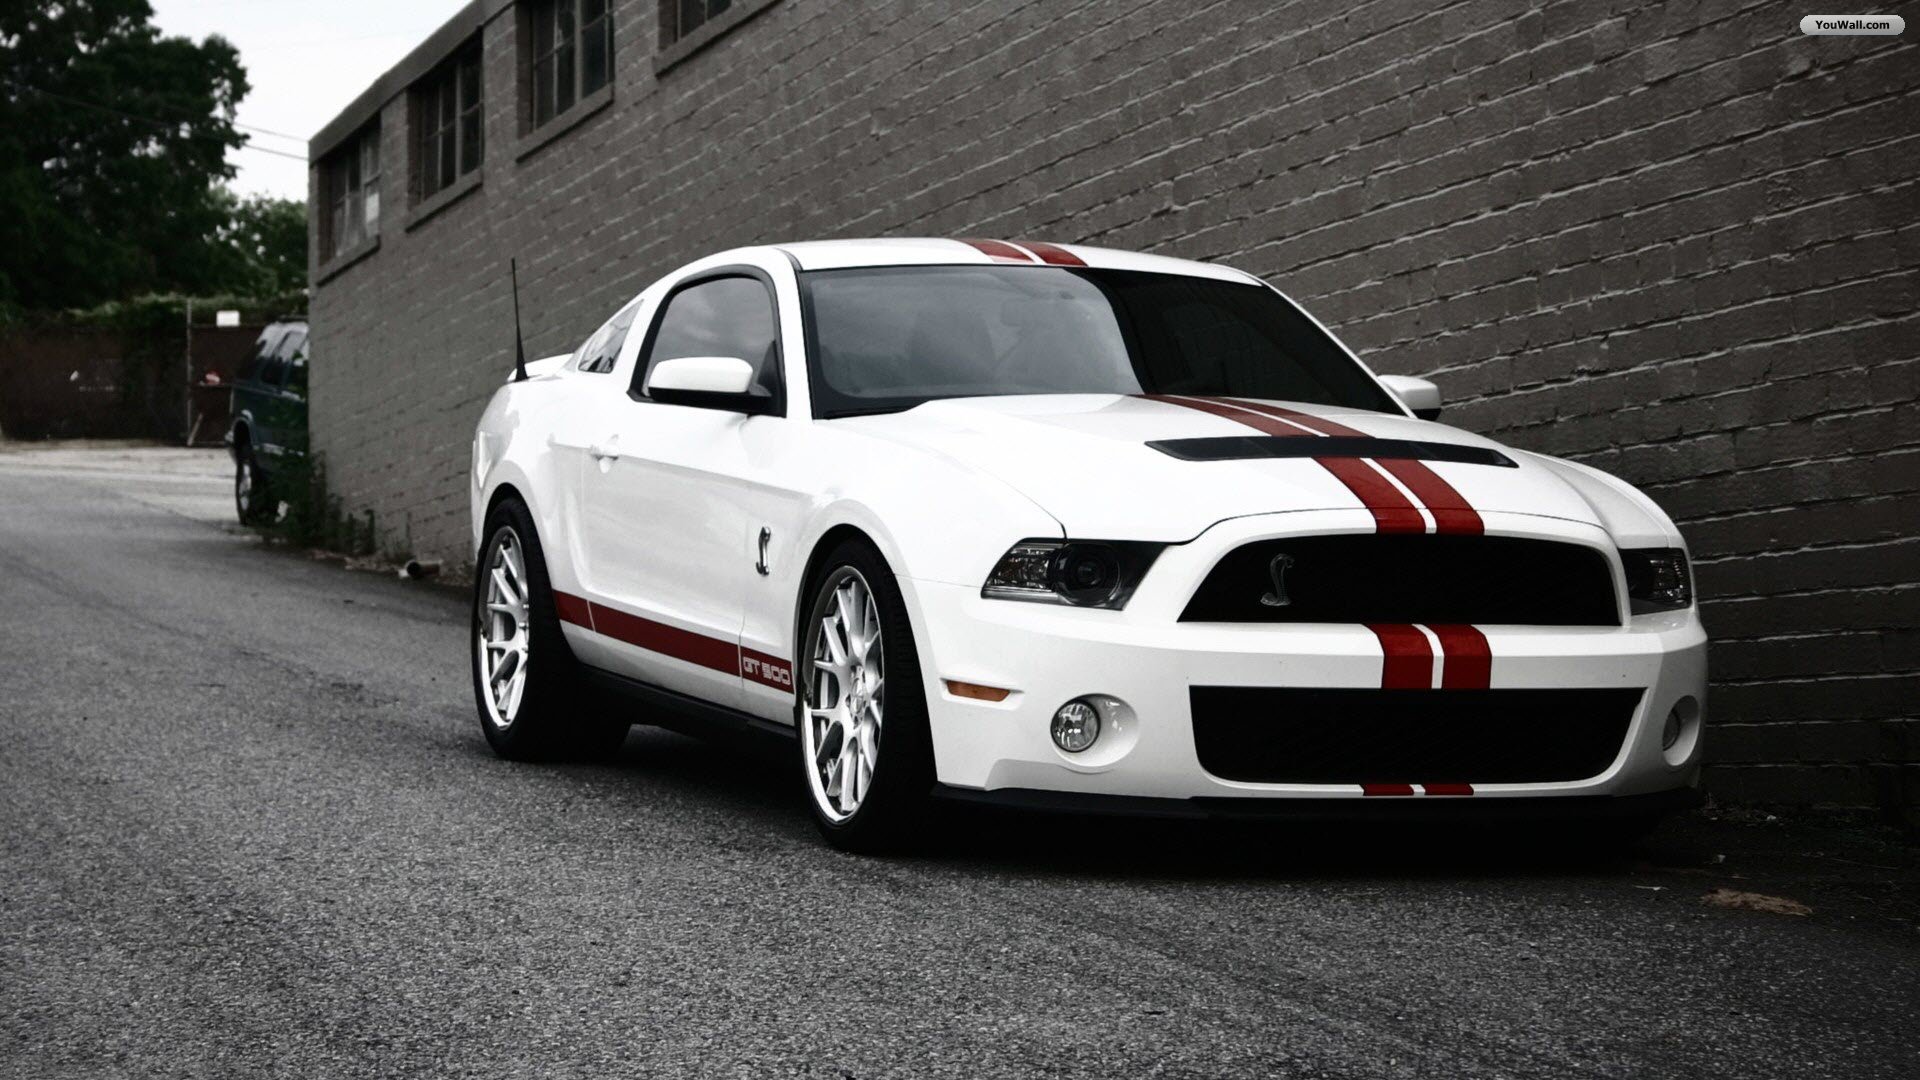 Ford Cars Shelby Wallpaper HD Cool Walldiskpaper